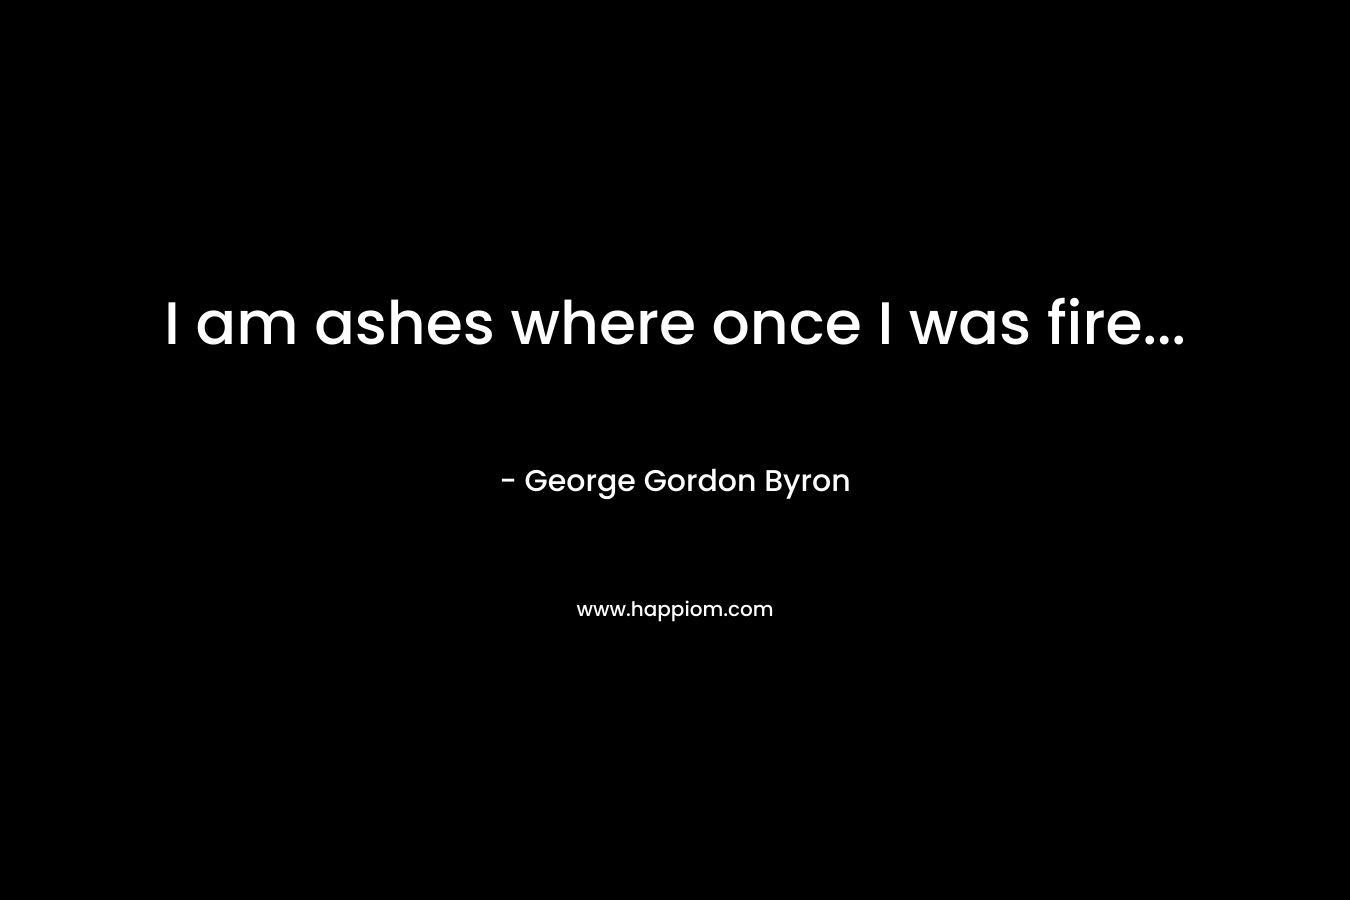 I am ashes where once I was fire...